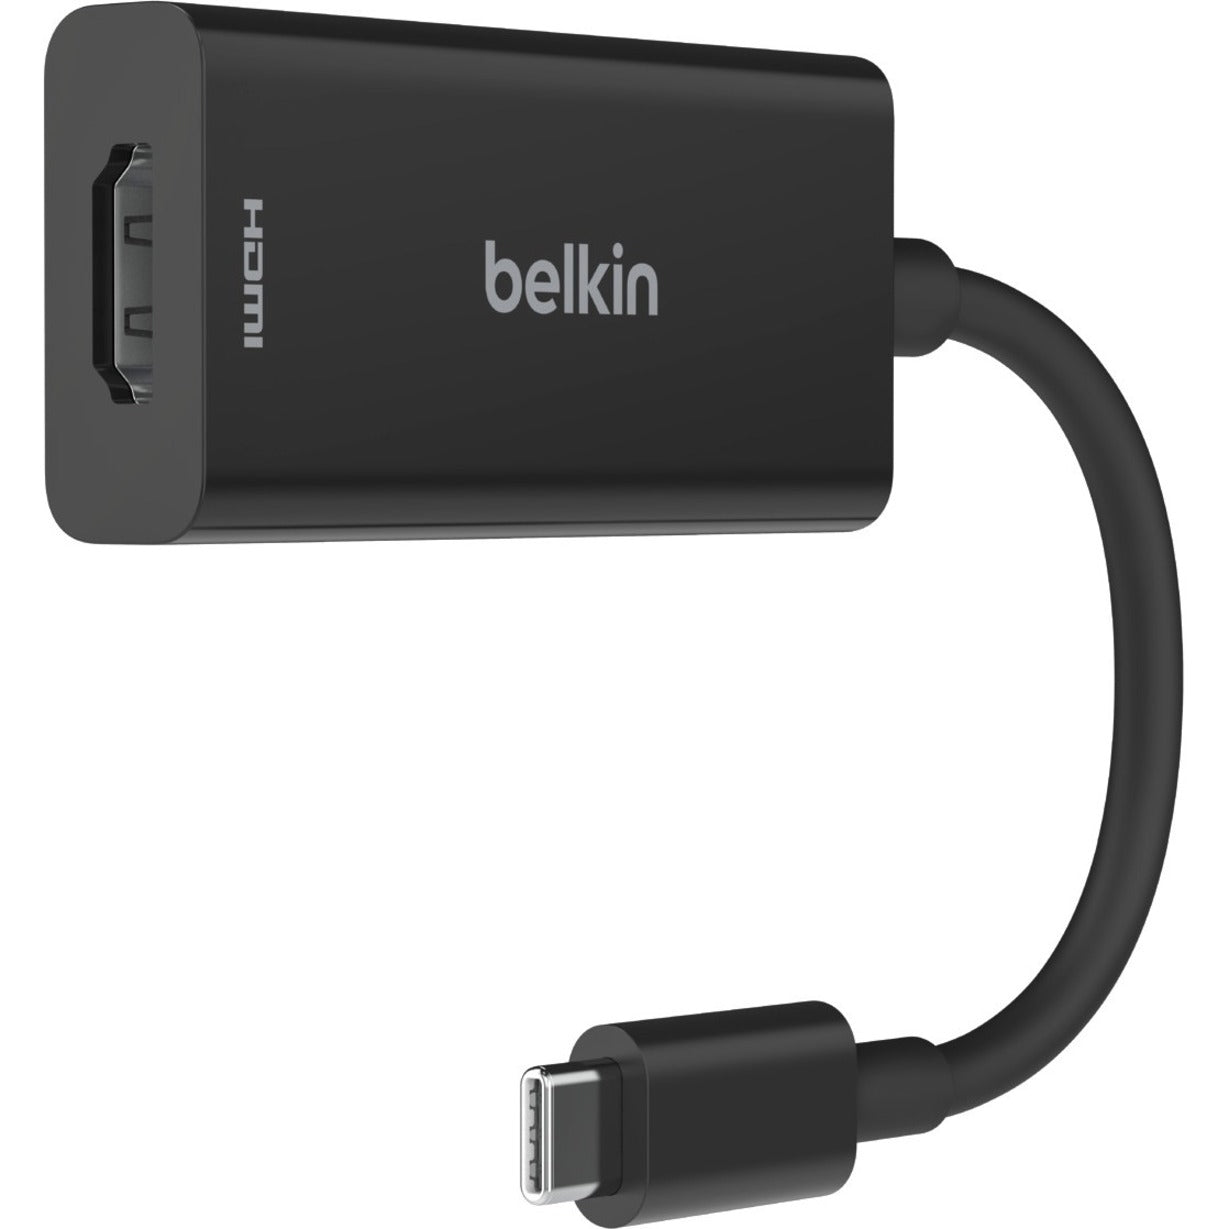 Belkin AVC013BTBK Connect USB-C to HDMI 2.1 Adapter, Plug and Play, 7680 x 4320 Resolution Support